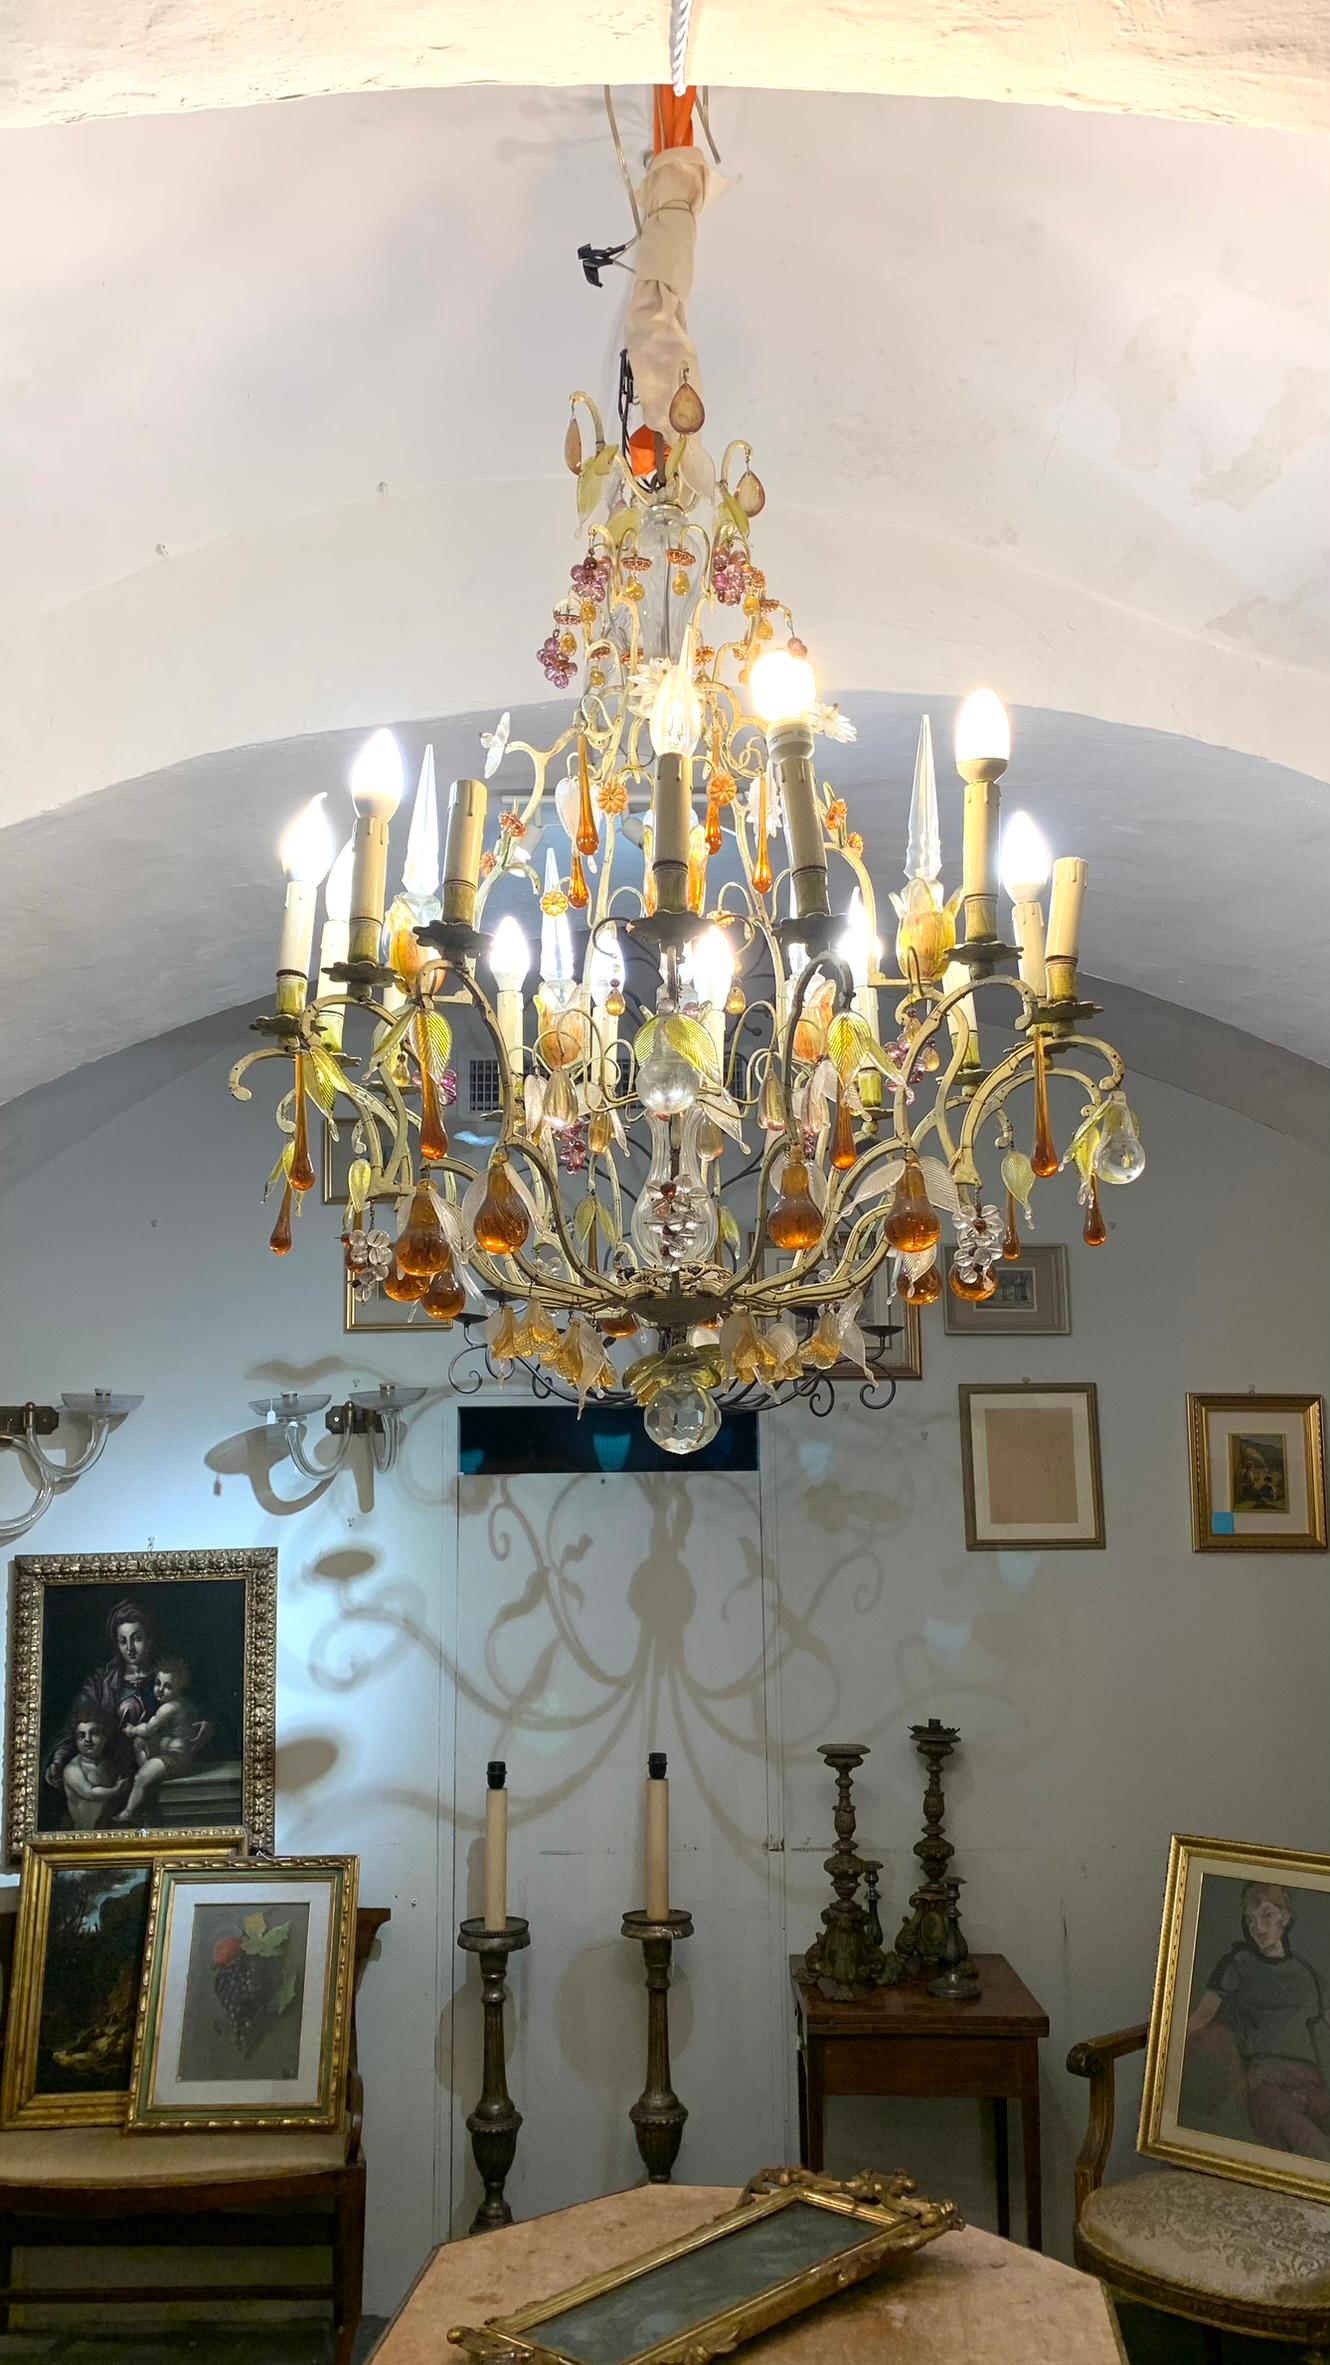 Refined chandelier in white lacquered bronze with fruit pendants (grapes) and colored glass leaves (yellow, purple and orange). The chandelier has 24 lights. It is ascribed to Tuscan manufacture from the end of the 19th century.

Measurements: H